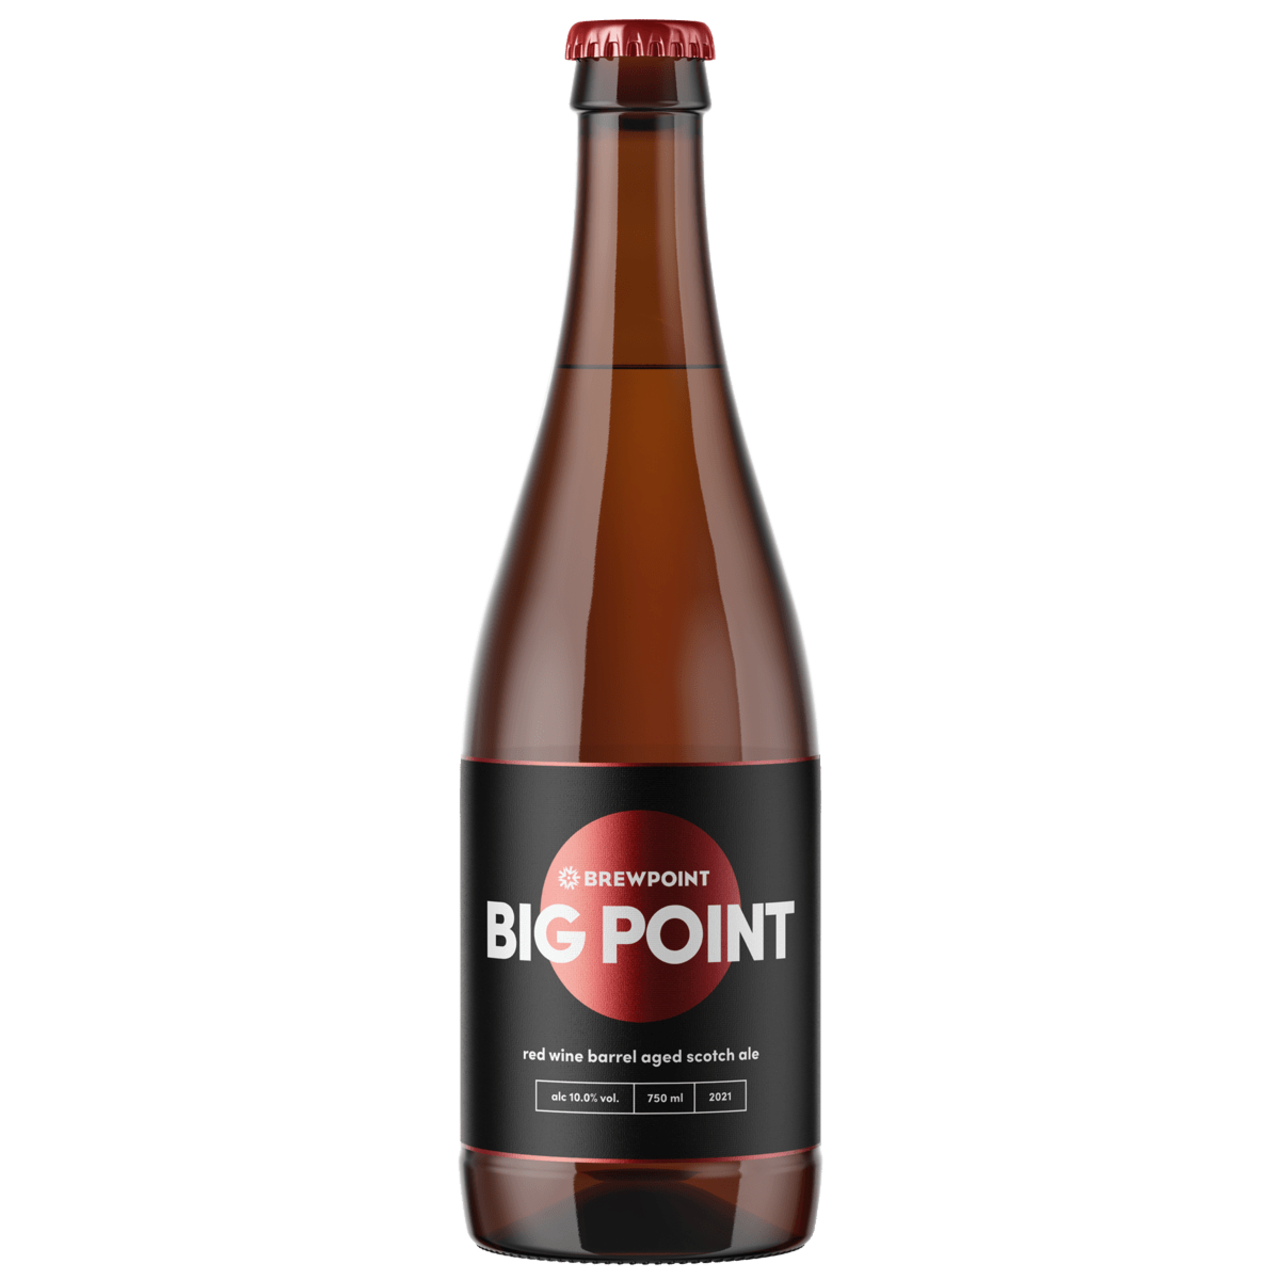 View Big Point Bottle image online at Brewpoint